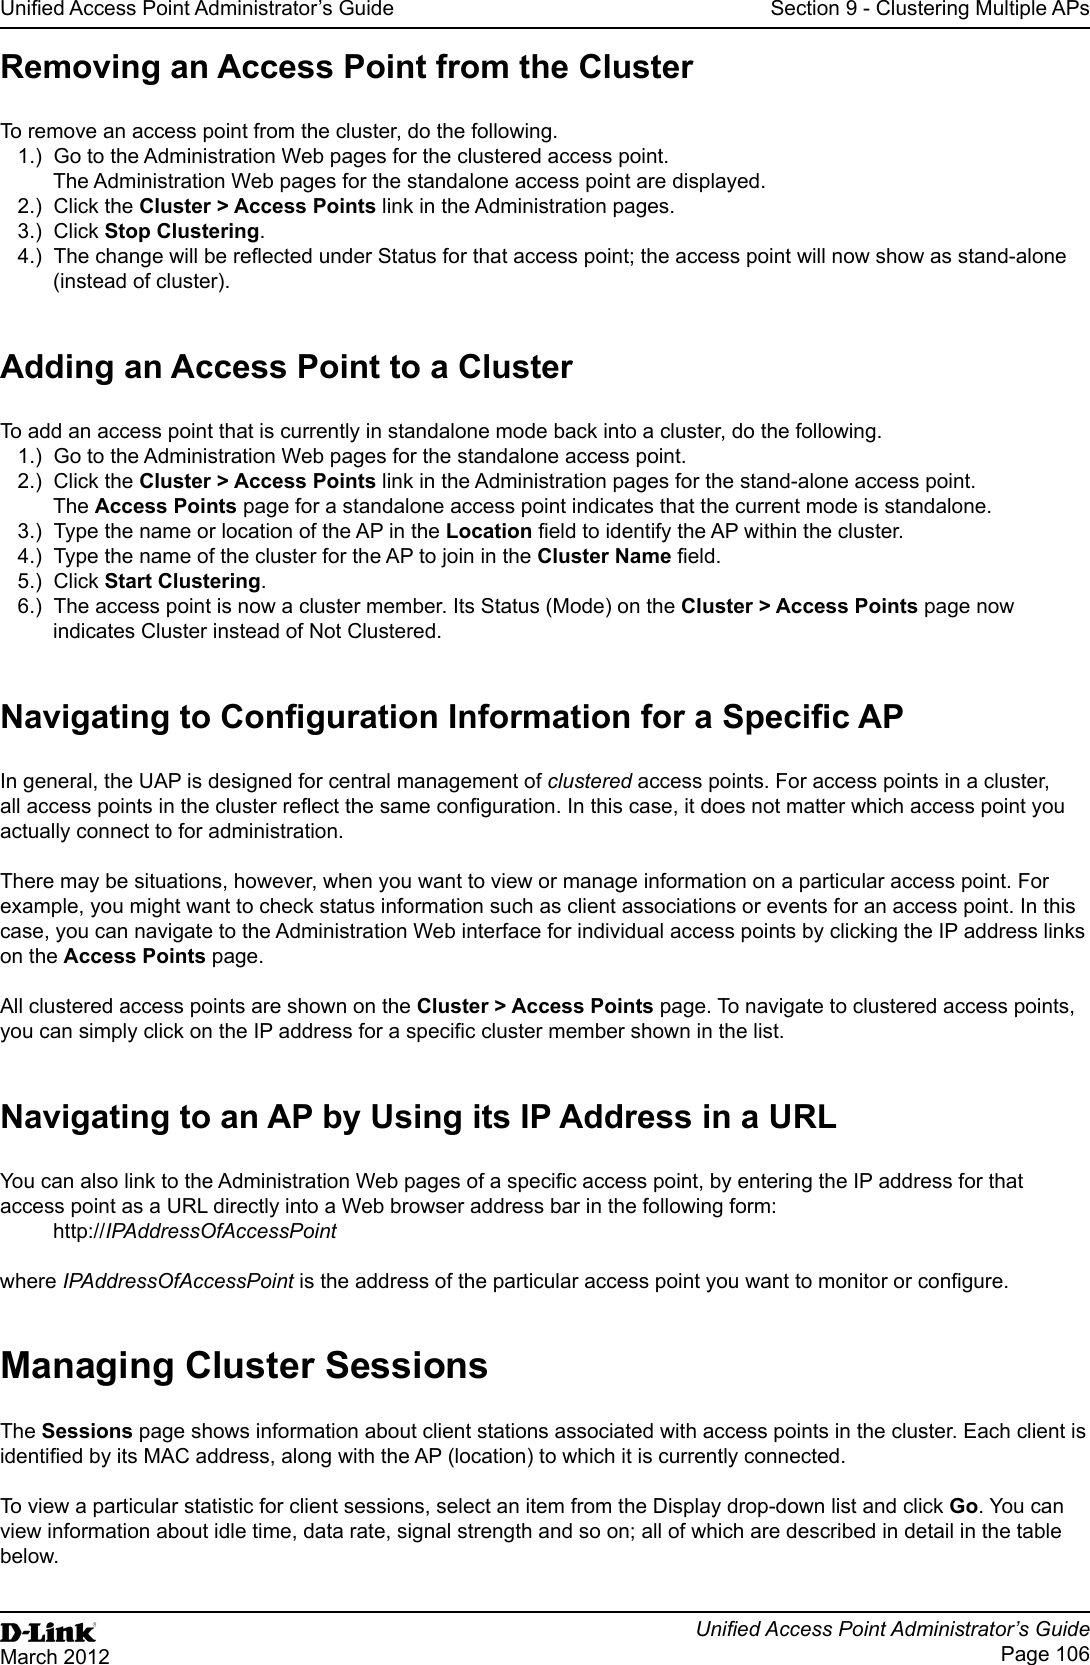 Unied Access Point Administrator’s GuideUnied Access Point Administrator’s GuidePage 106March 2012Section 9 - Clustering Multiple APsRemoving an Access Point from the ClusterTo remove an access point from the cluster, do the following.1.)  Go to the Administration Web pages for the clustered access point. The Administration Web pages for the standalone access point are displayed.2.)  Click the Cluster &gt; Access Points link in the Administration pages.3.)  Click Stop Clustering.4.)  The change will be reected under Status for that access point; the access point will now show as stand-alone (instead of cluster).Adding an Access Point to a ClusterTo add an access point that is currently in standalone mode back into a cluster, do the following.1.)  Go to the Administration Web pages for the standalone access point.2.)  Click the Cluster &gt; Access Points link in the Administration pages for the stand-alone access point.The Access Points page for a standalone access point indicates that the current mode is standalone.3.)  Type the name or location of the AP in the Location eld to identify the AP within the cluster.4.)  Type the name of the cluster for the AP to join in the Cluster Name eld.5.)  Click Start Clustering.6.)  The access point is now a cluster member. Its Status (Mode) on the Cluster &gt; Access Points page now indicates Cluster instead of Not Clustered.Navigating to Conguration Information for a Specic APIn general, the UAP is designed for central management of clustered access points. For access points in a cluster, all access points in the cluster reect the same conguration. In this case, it does not matter which access point you actually connect to for administration.There may be situations, however, when you want to view or manage information on a particular access point. For example, you might want to check status information such as client associations or events for an access point. In this case, you can navigate to the Administration Web interface for individual access points by clicking the IP address links on the Access Points page.All clustered access points are shown on the Cluster &gt; Access Points page. To navigate to clustered access points, you can simply click on the IP address for a specic cluster member shown in the list.Navigating to an AP by Using its IP Address in a URLYou can also link to the Administration Web pages of a specic access point, by entering the IP address for that access point as a URL directly into a Web browser address bar in the following form:http://IPAddressOfAccessPointwhere IPAddressOfAccessPoint is the address of the particular access point you want to monitor or congure.Managing Cluster SessionsThe Sessions page shows information about client stations associated with access points in the cluster. Each client is identied by its MAC address, along with the AP (location) to which it is currently connected.To view a particular statistic for client sessions, select an item from the Display drop-down list and click Go. You can view information about idle time, data rate, signal strength and so on; all of which are described in detail in the table below.